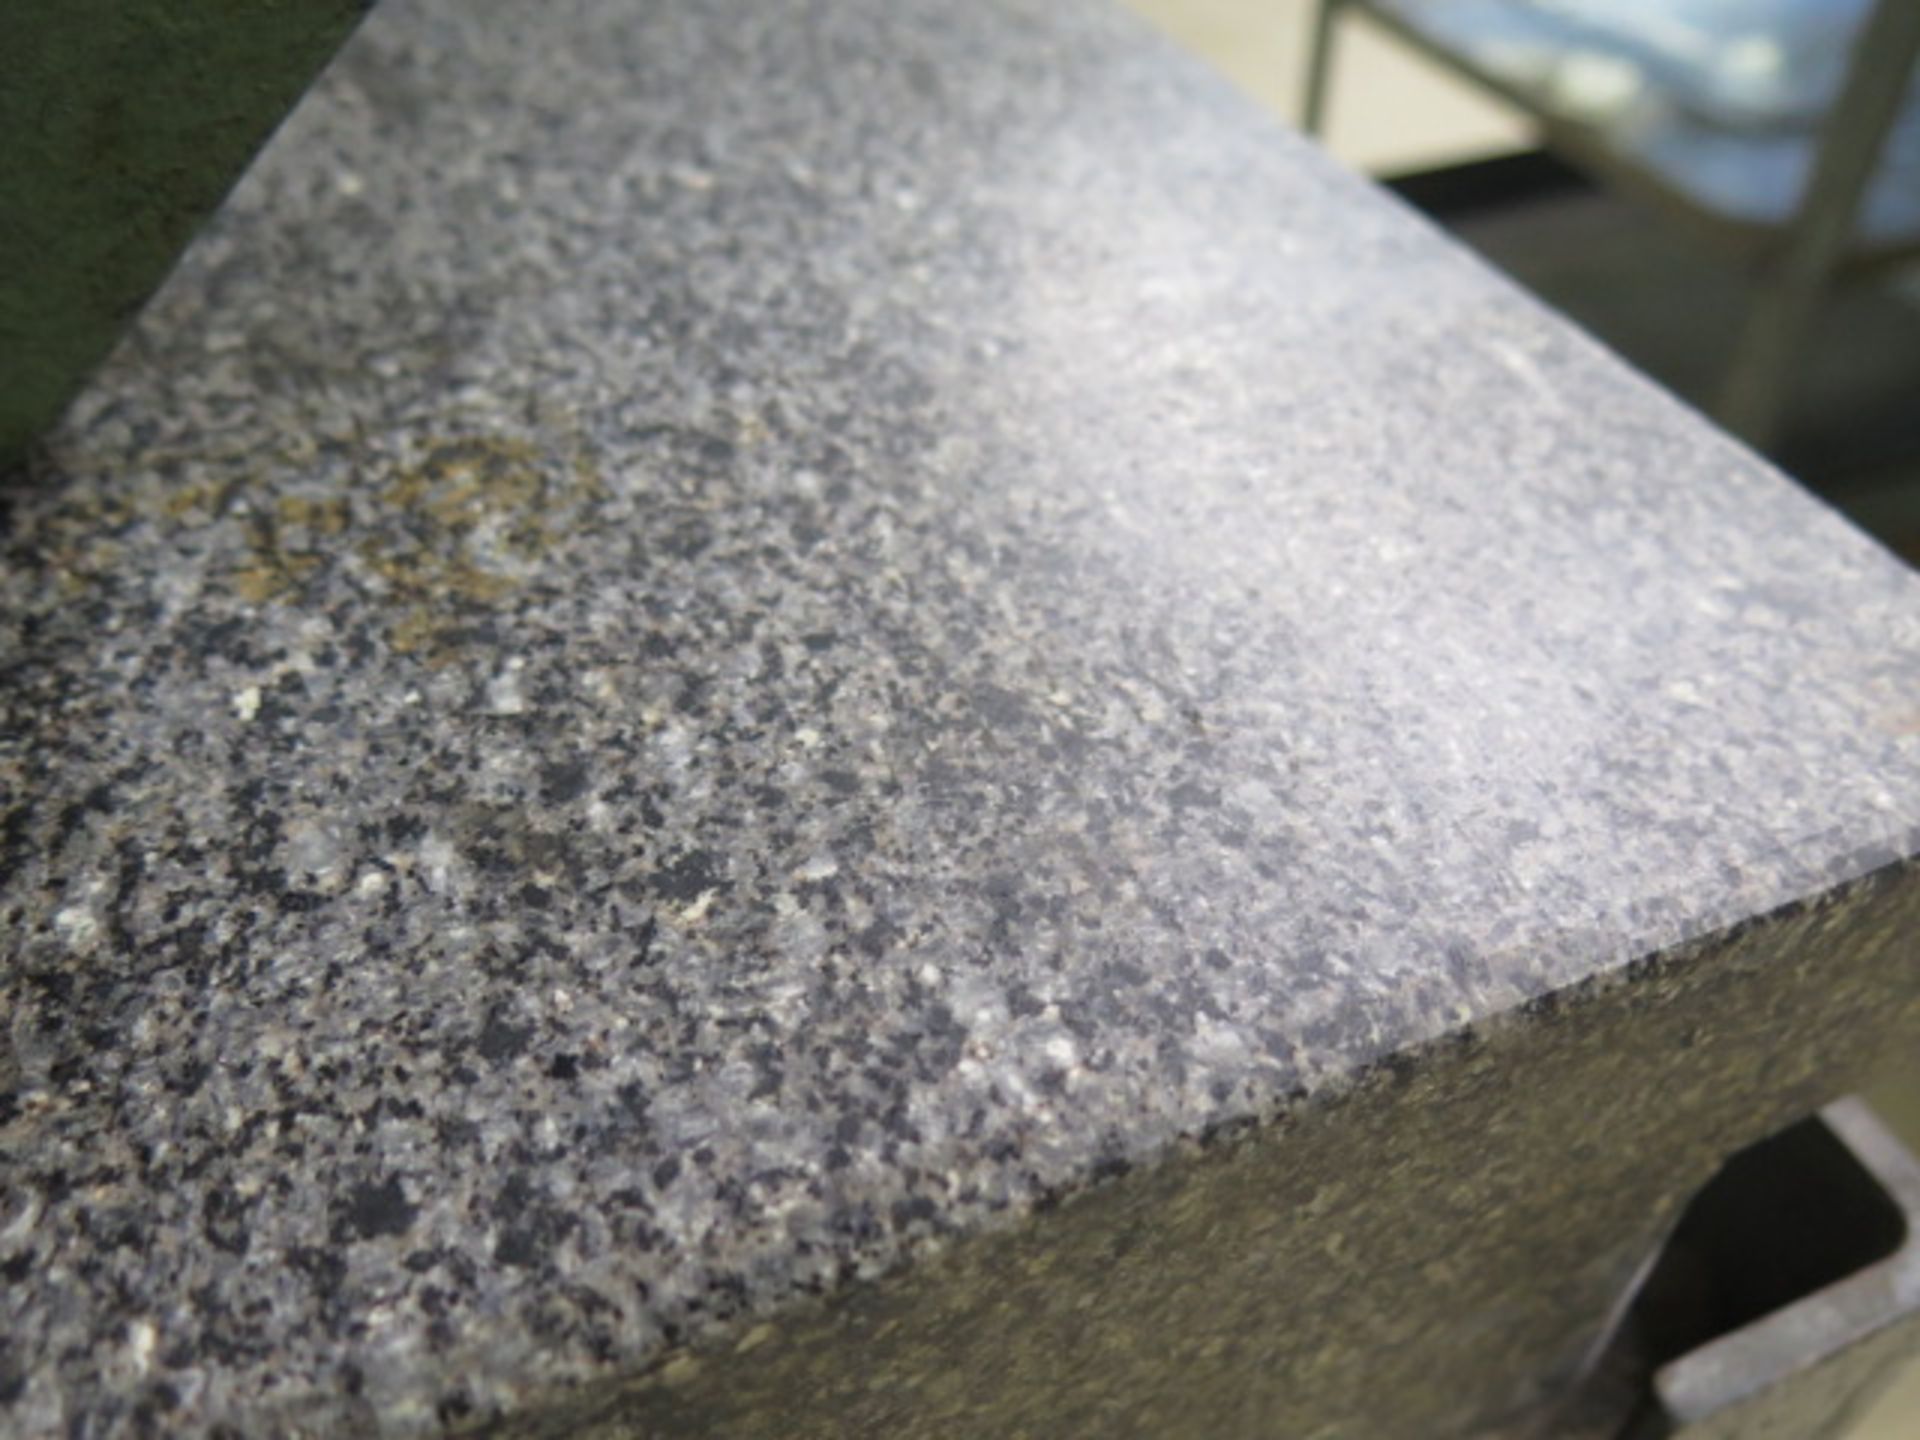 24” x 36” x 4” 2-Ledge Granite Surface Plate w/ Stand (SOLD AS-IS - NO WARRANTY) - Image 4 of 4